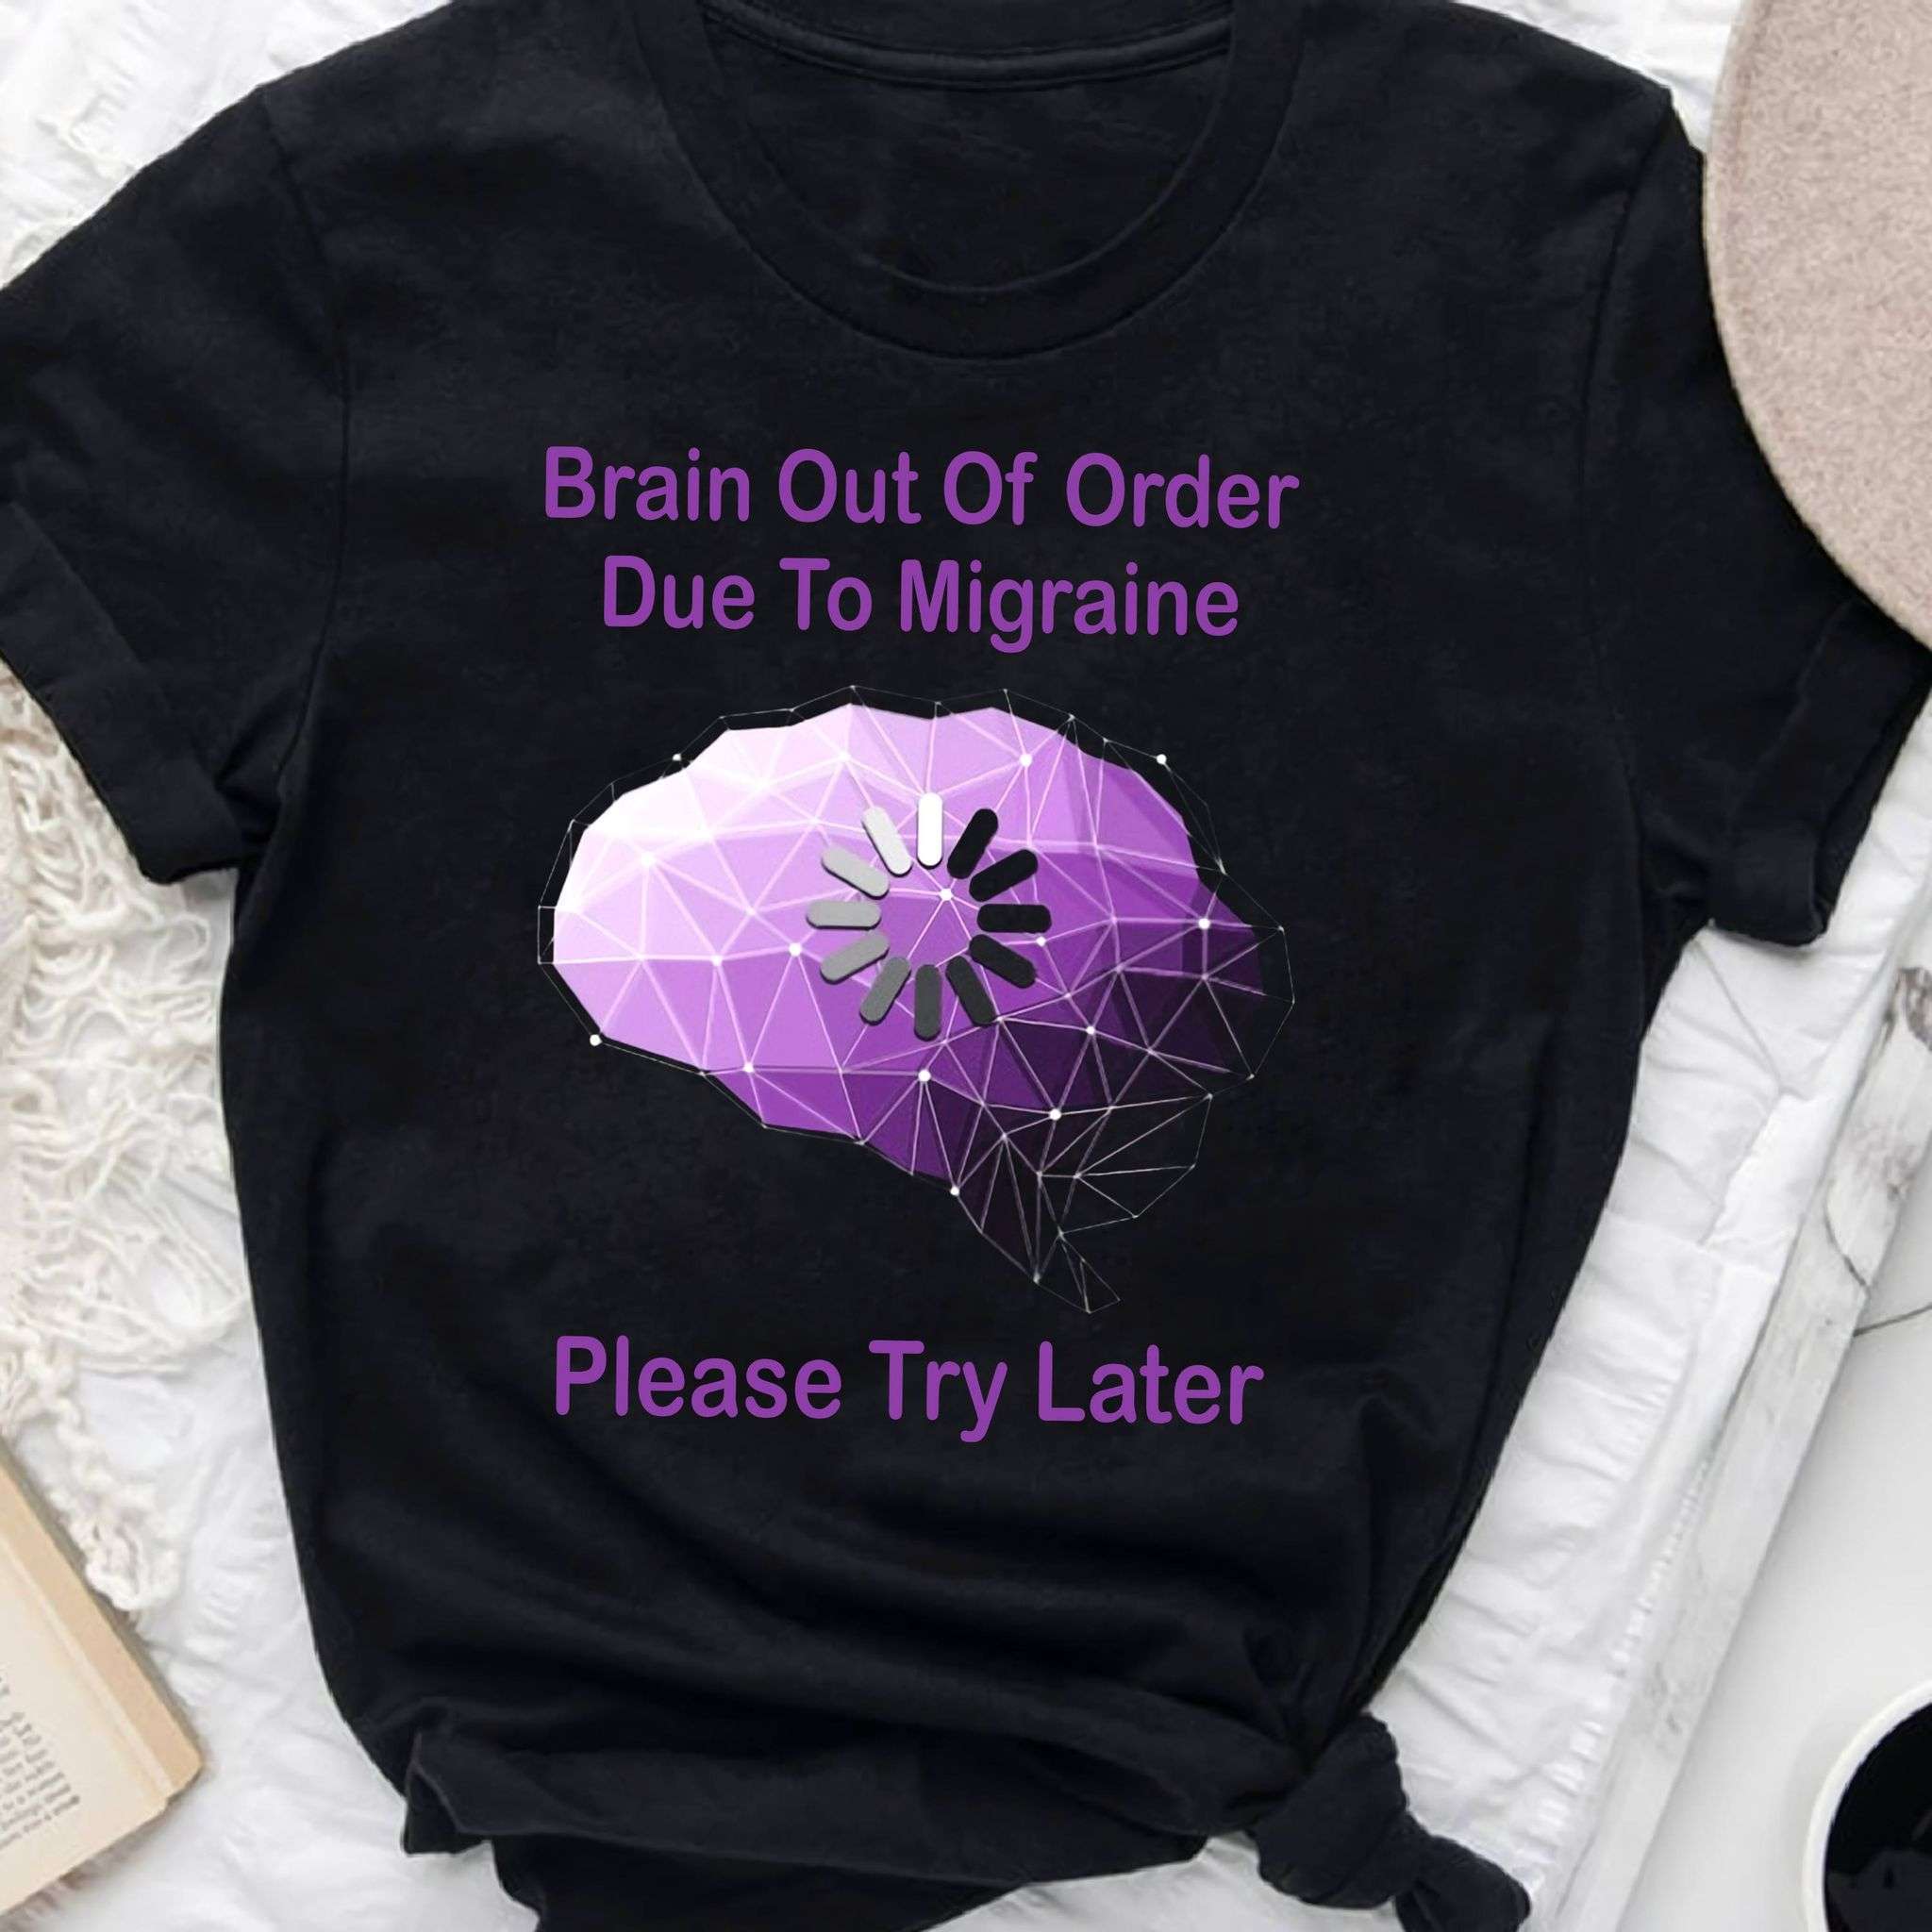 Brain out of order due to migraine - Migraine awareness, loading brain